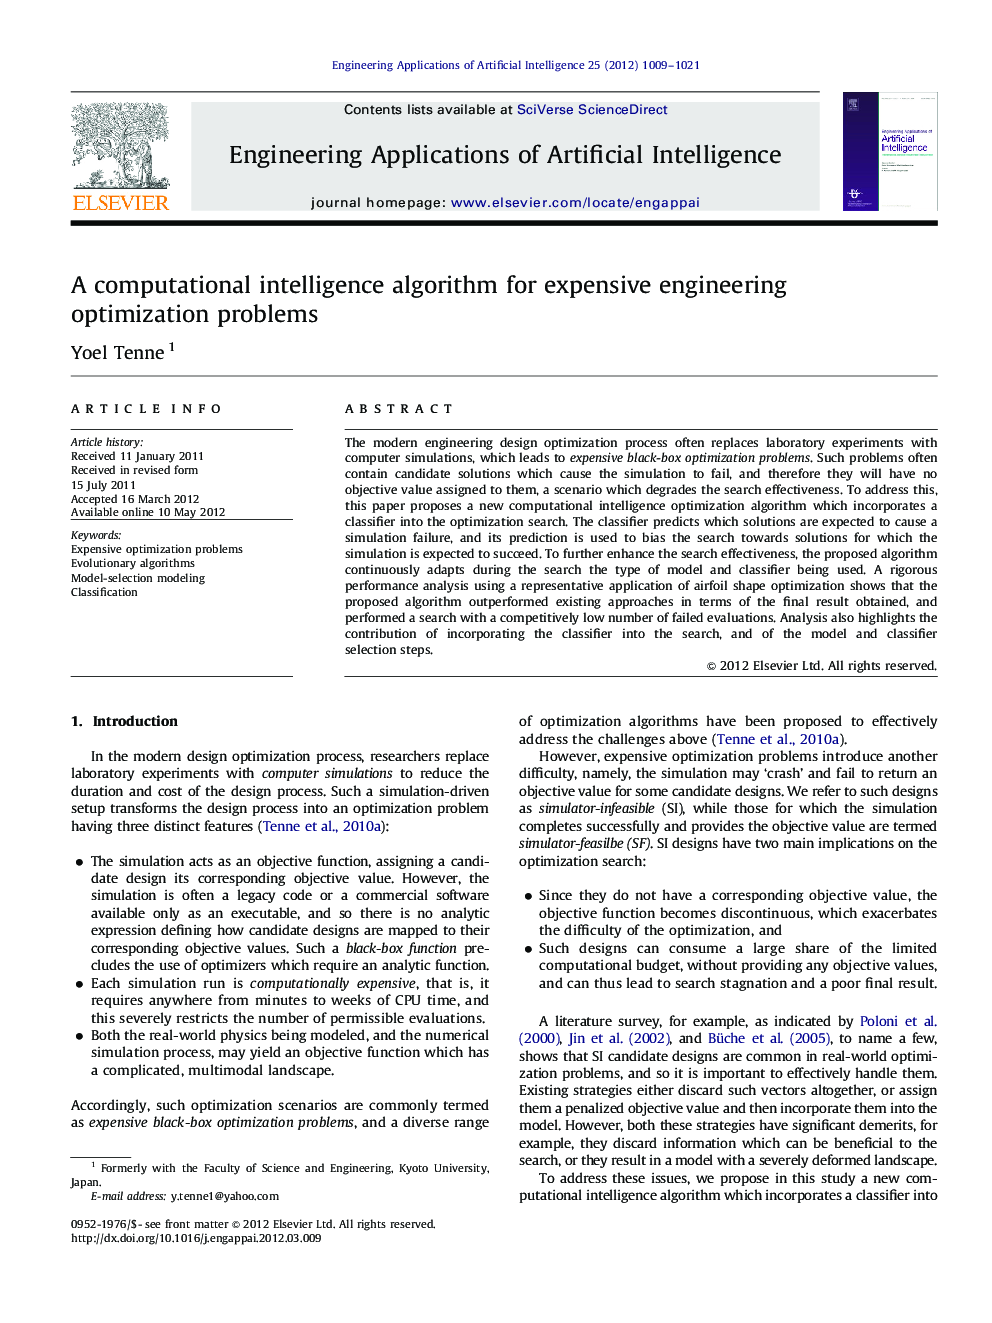 A computational intelligence algorithm for expensive engineering optimization problems